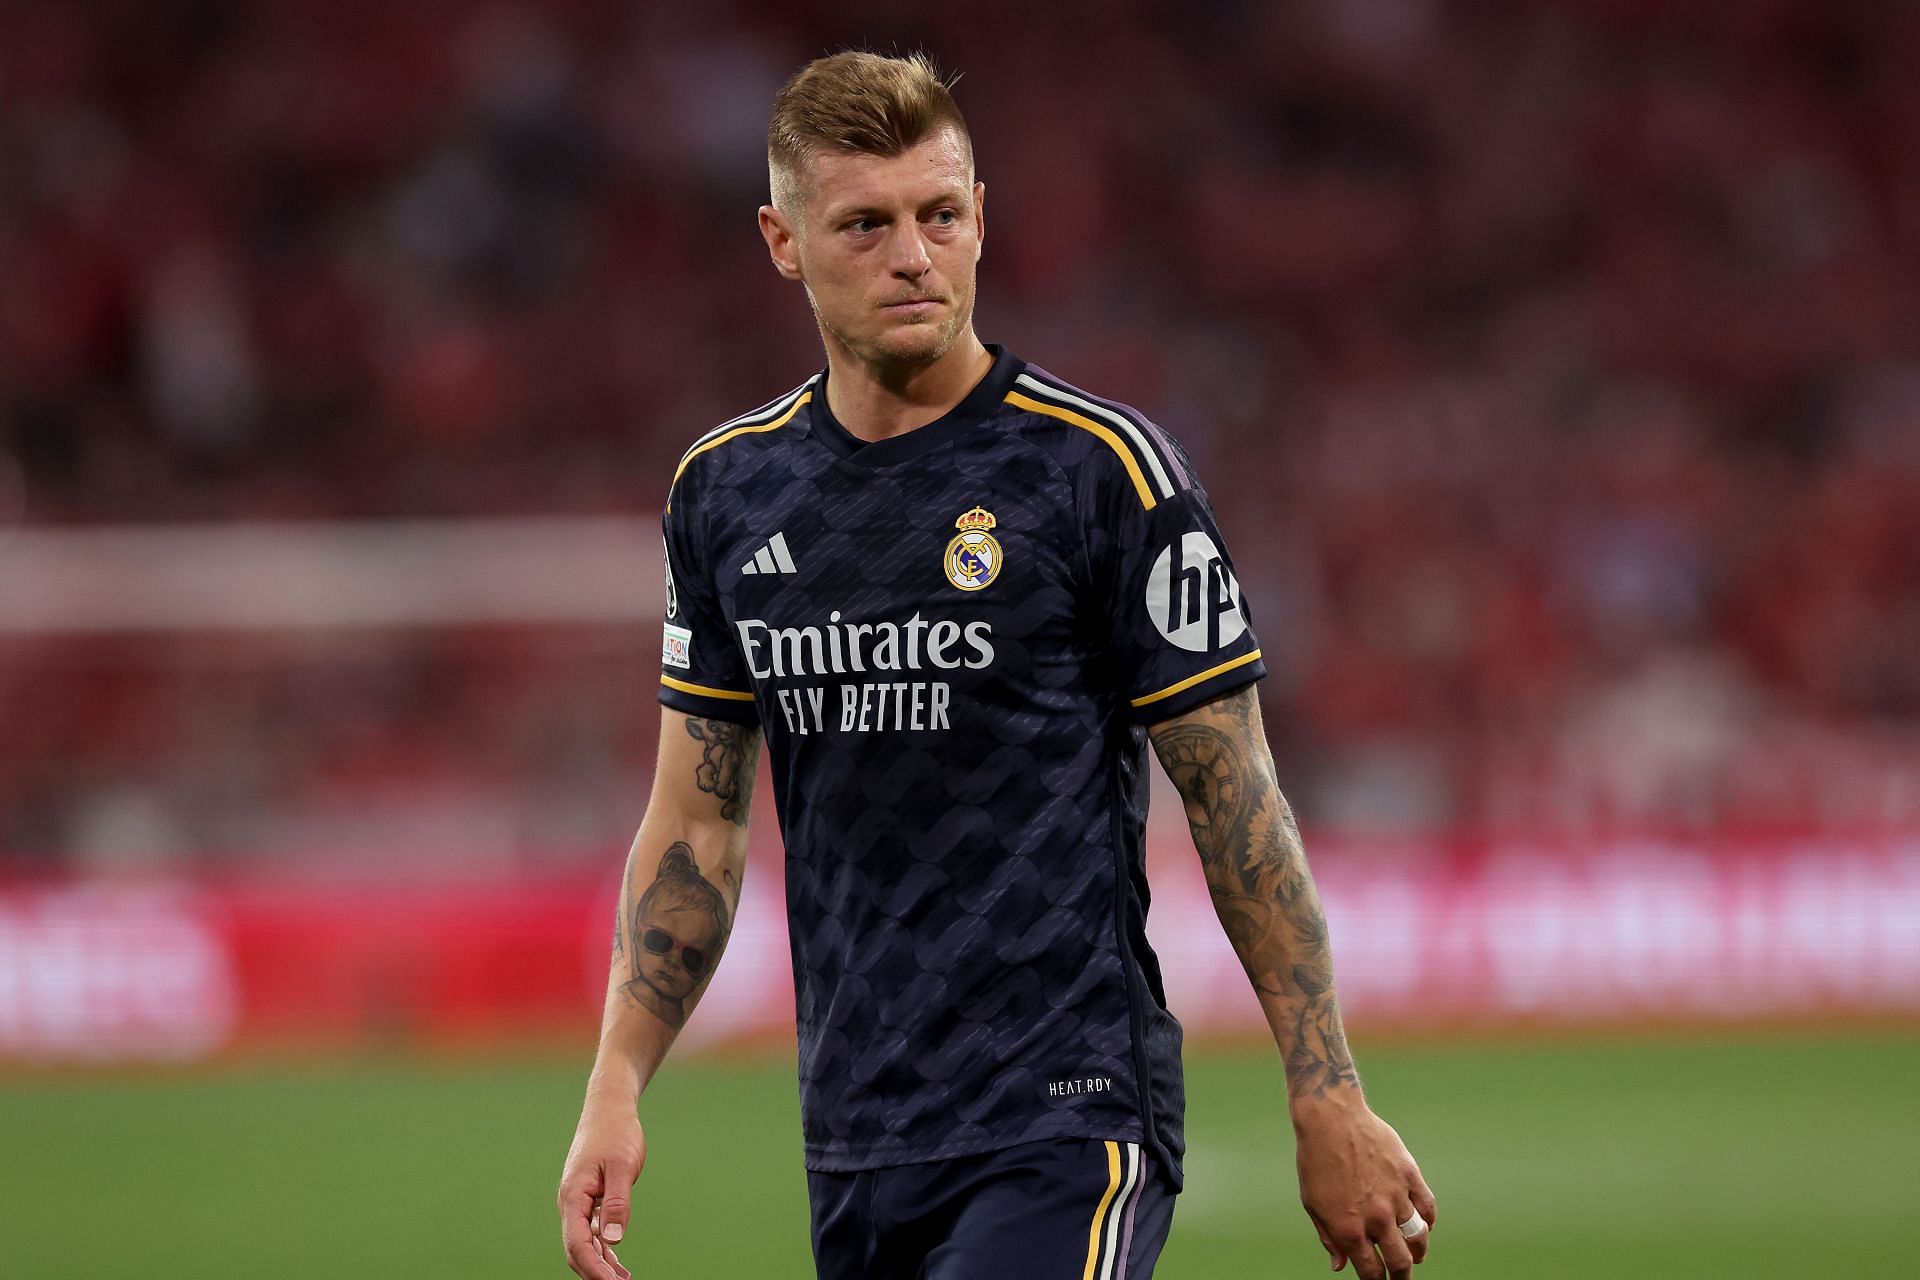 Toni Kroos has been an omnipresent figure in the starting XI this season